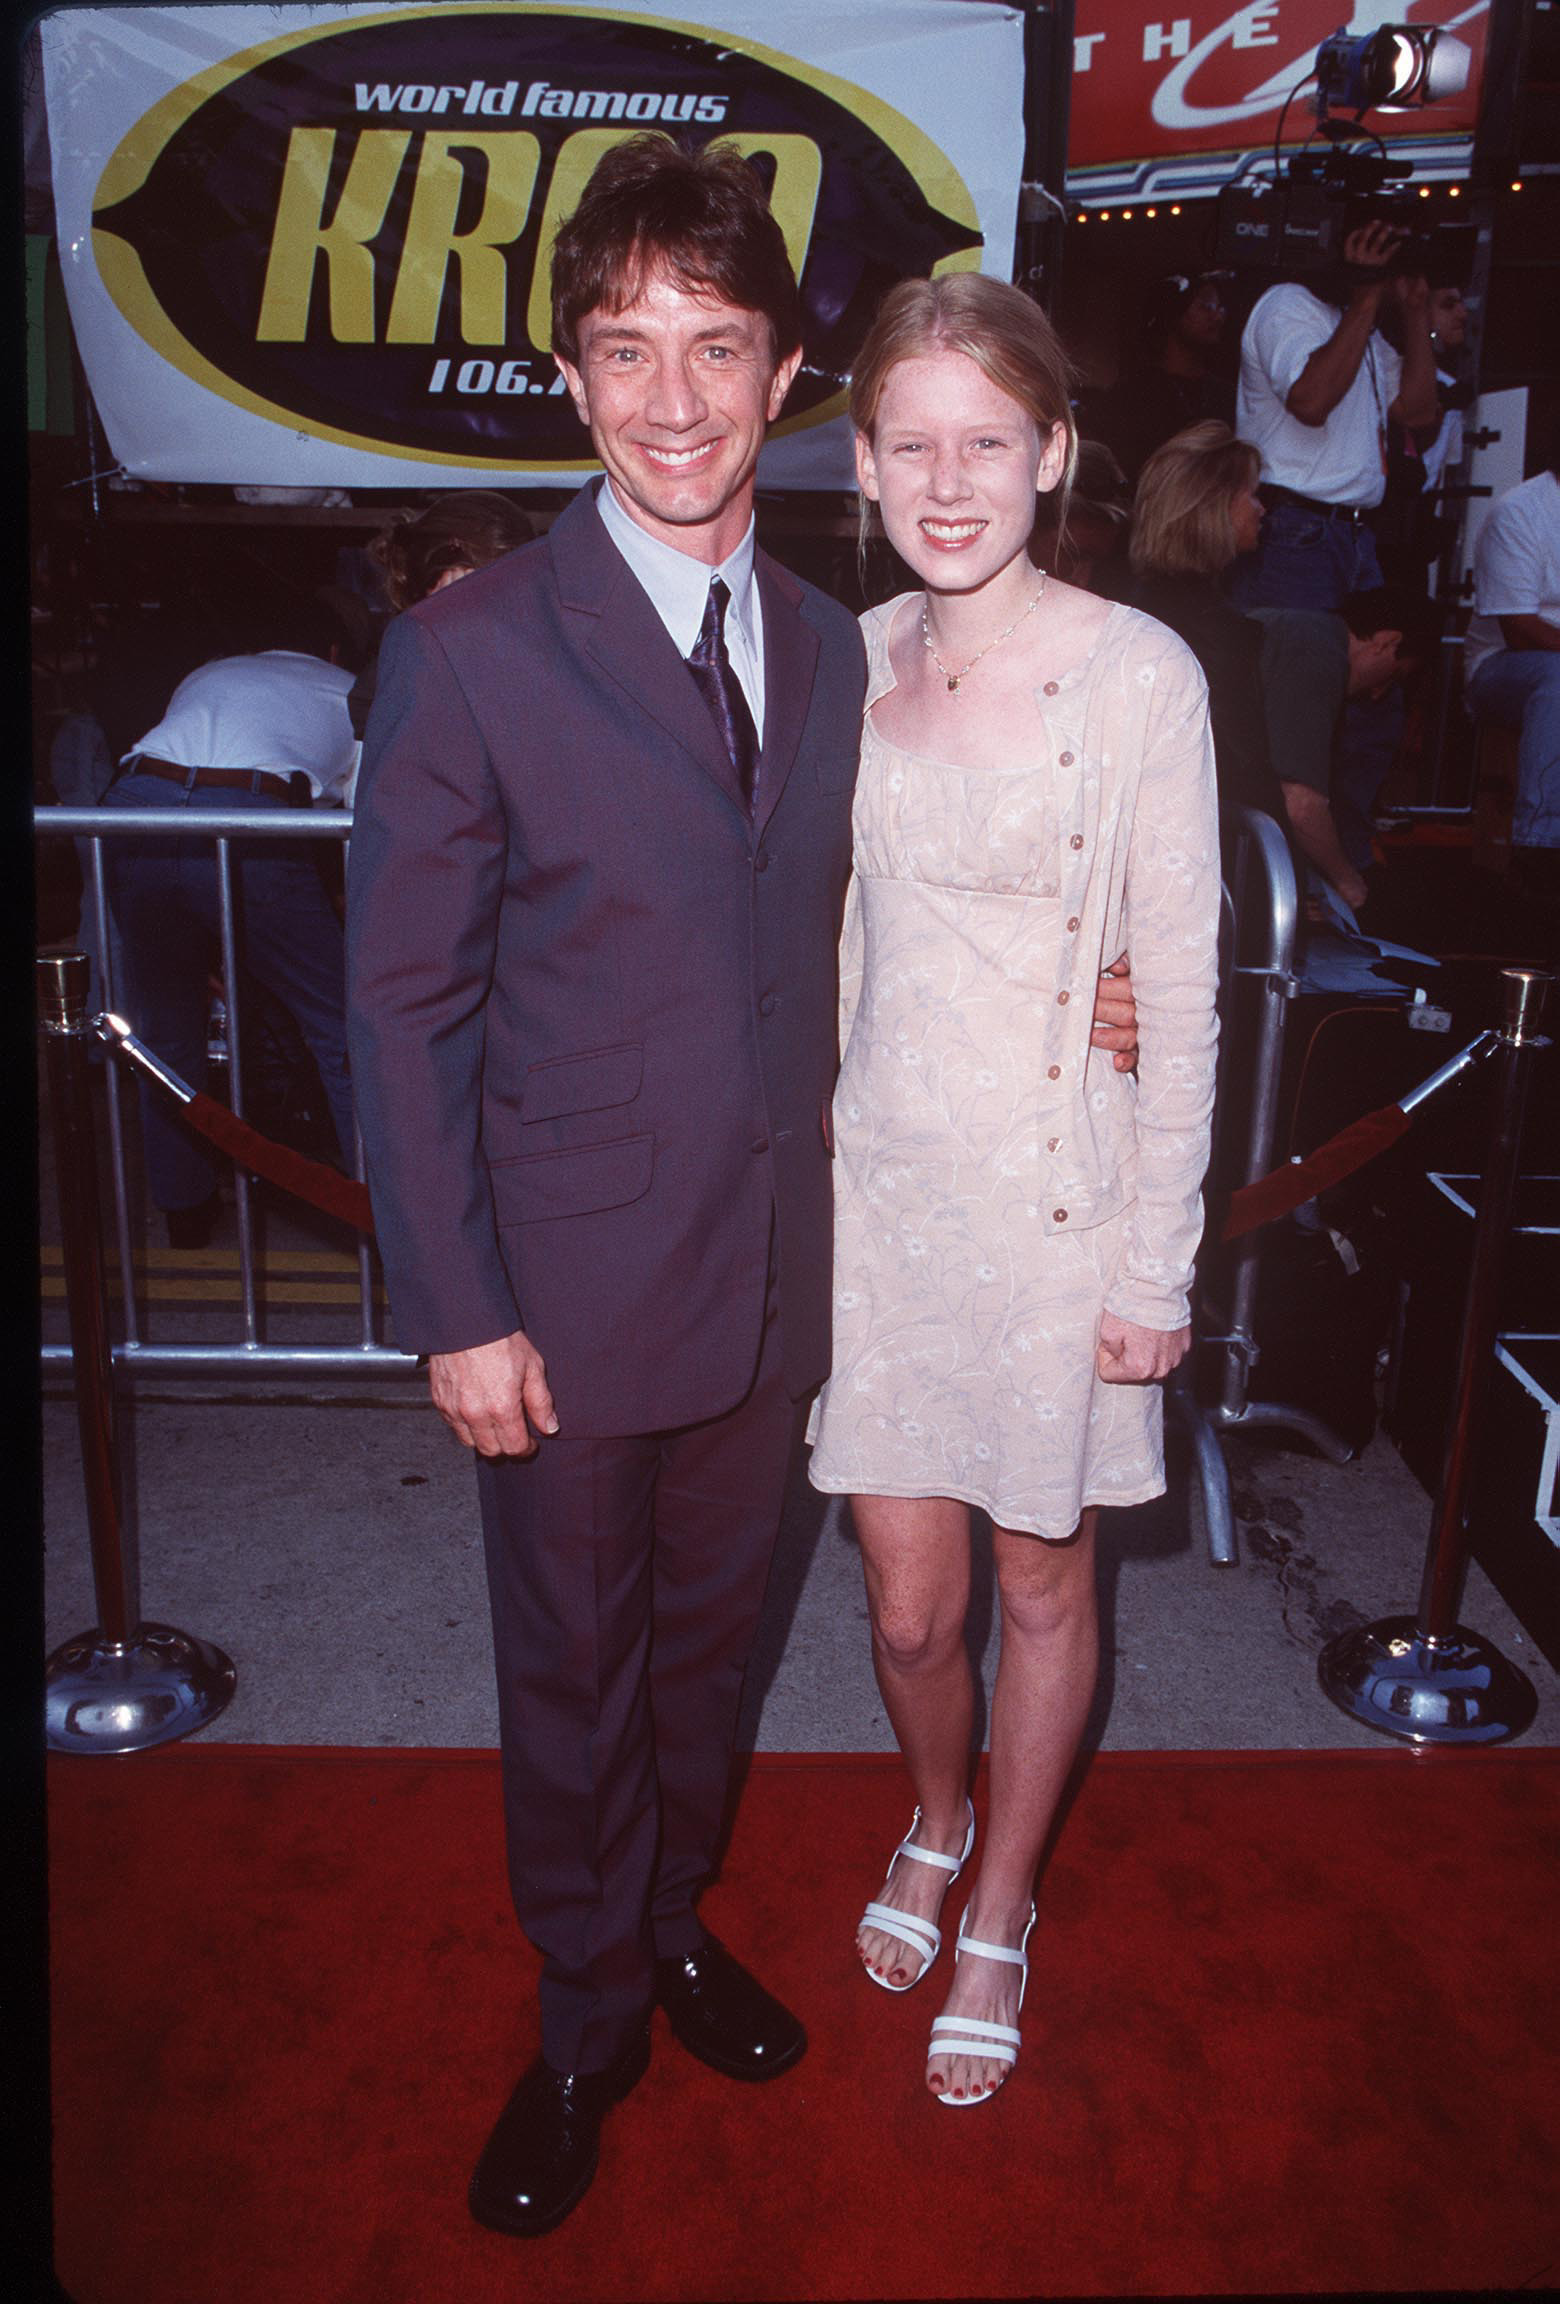 Martin Short and Katherine Elizabeth Short at the "The X-Files" Los Angeles Premiere on June 11, 1998, in Westwood, California. | Source: Getty Images